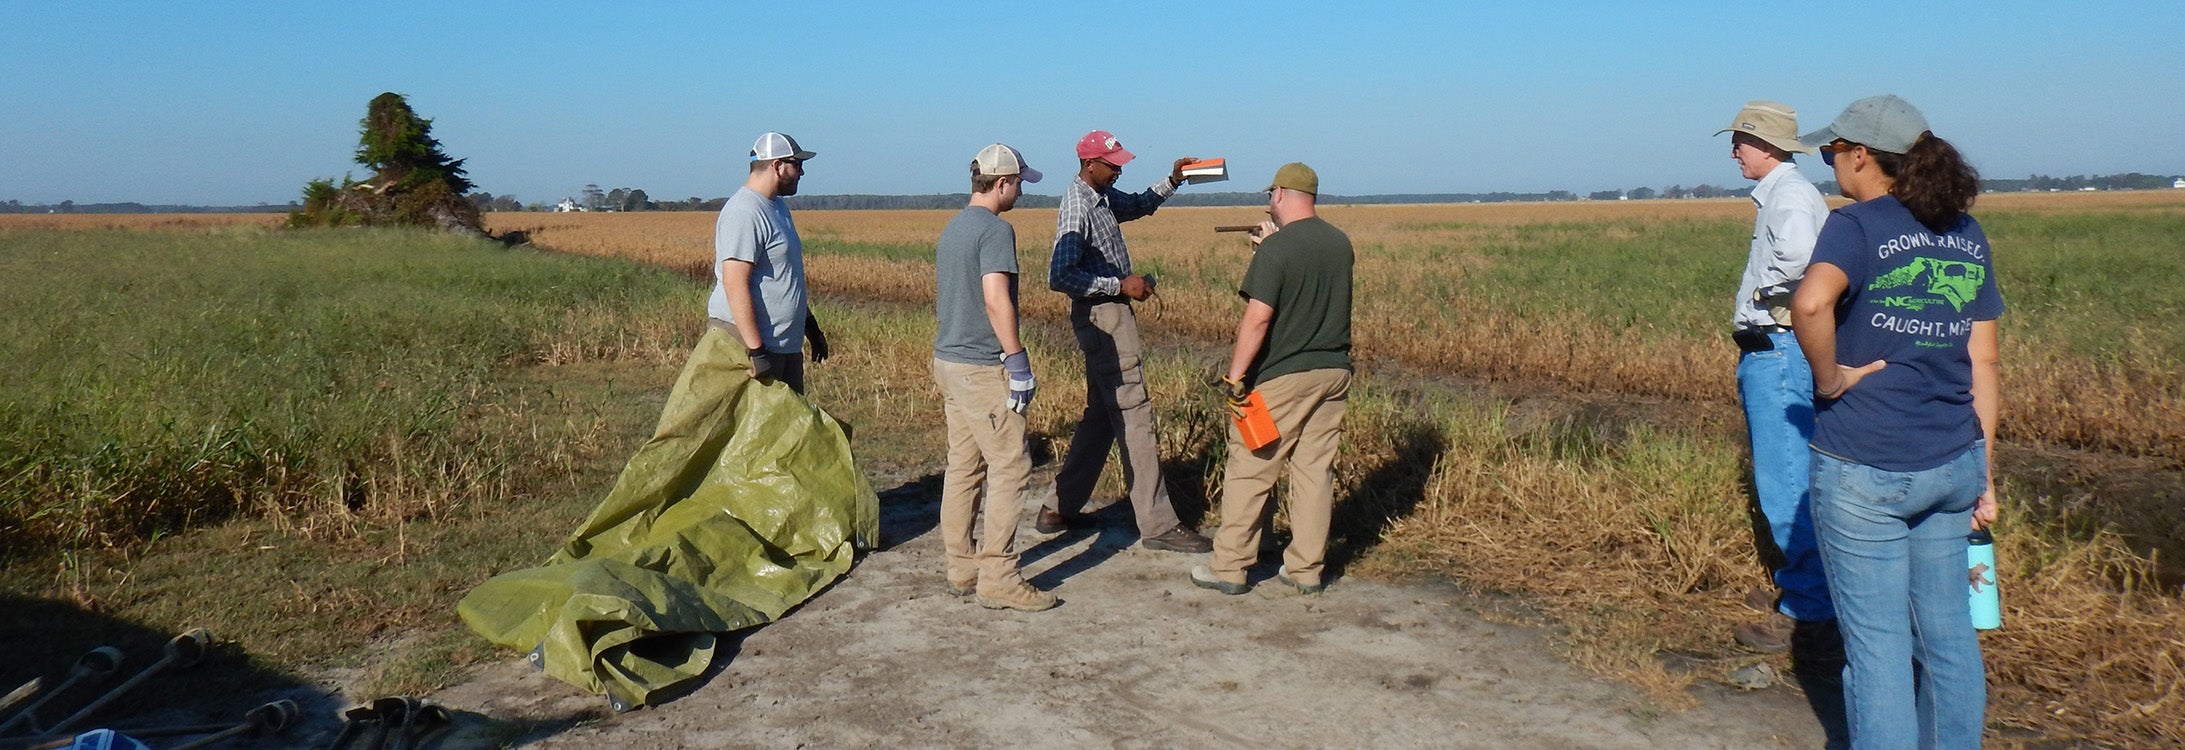 Dr. Alex K. Manda directs a research group at a Hyde County field site for his RAPID grant. Manda’s team is researching how Hurricane Florence and previous storms may be impacting eastern North Carolina farmers and their crops.